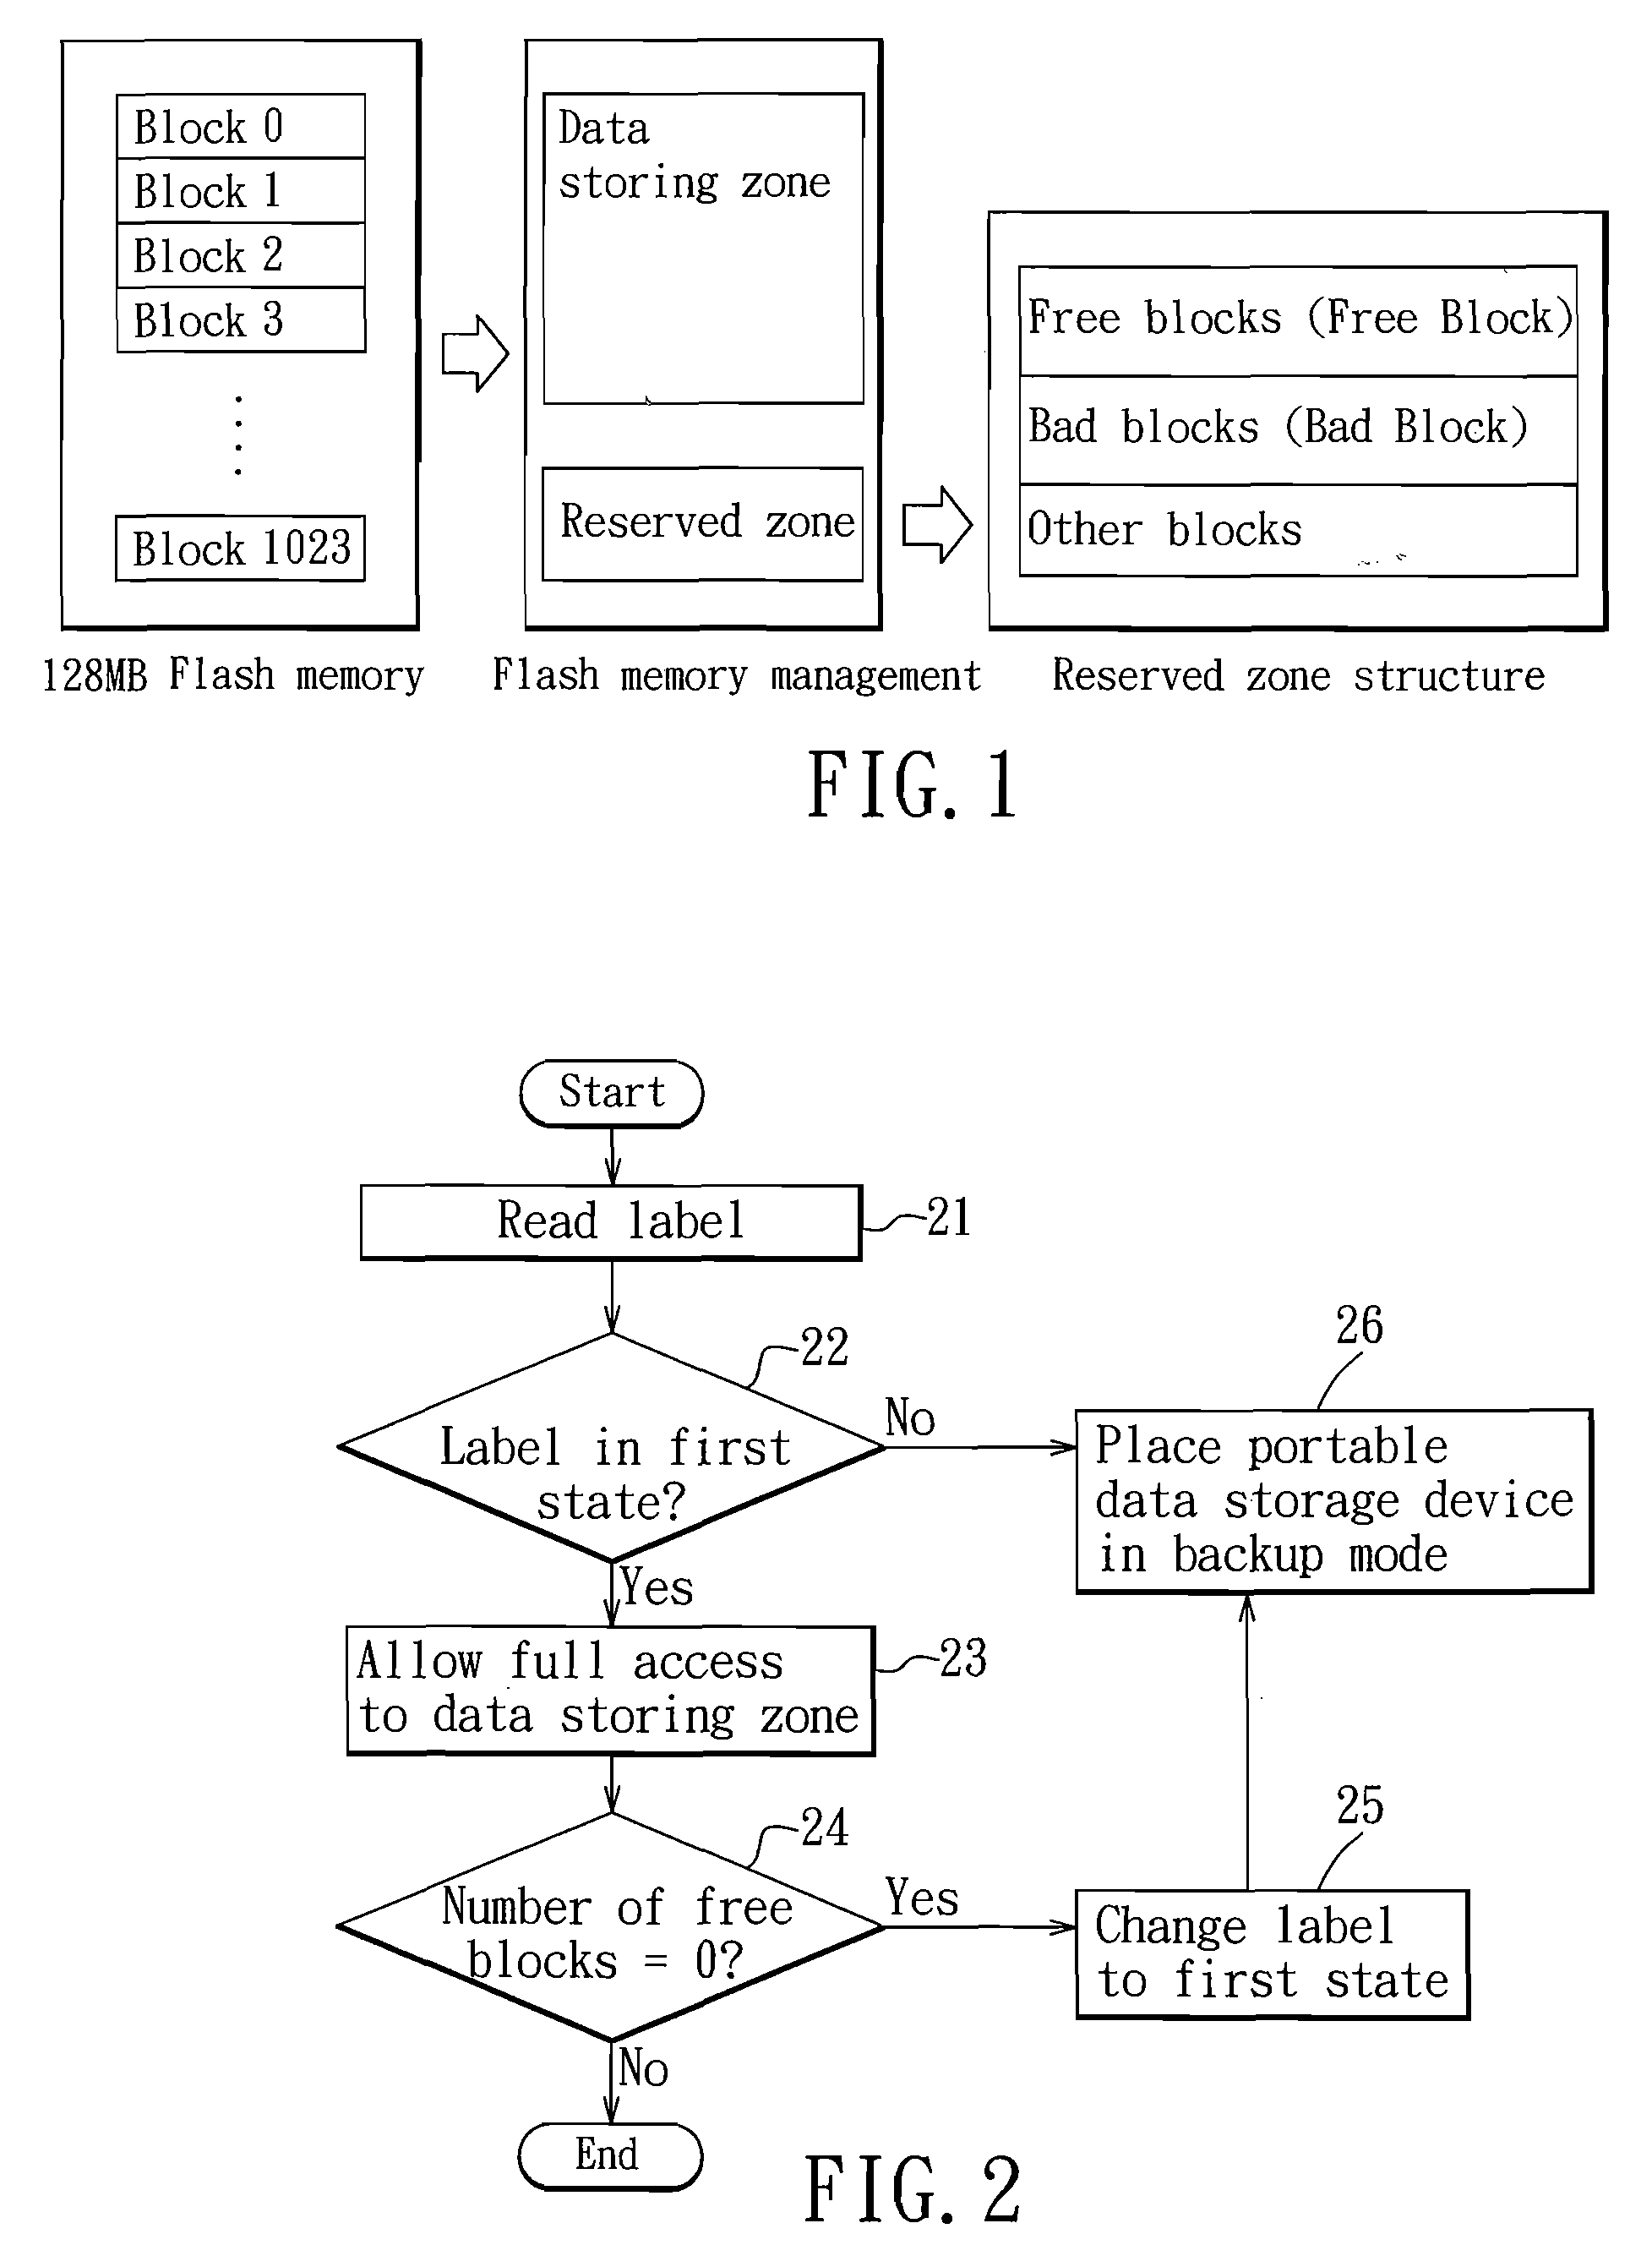 Method of dynamic memory management for a portable data storage device